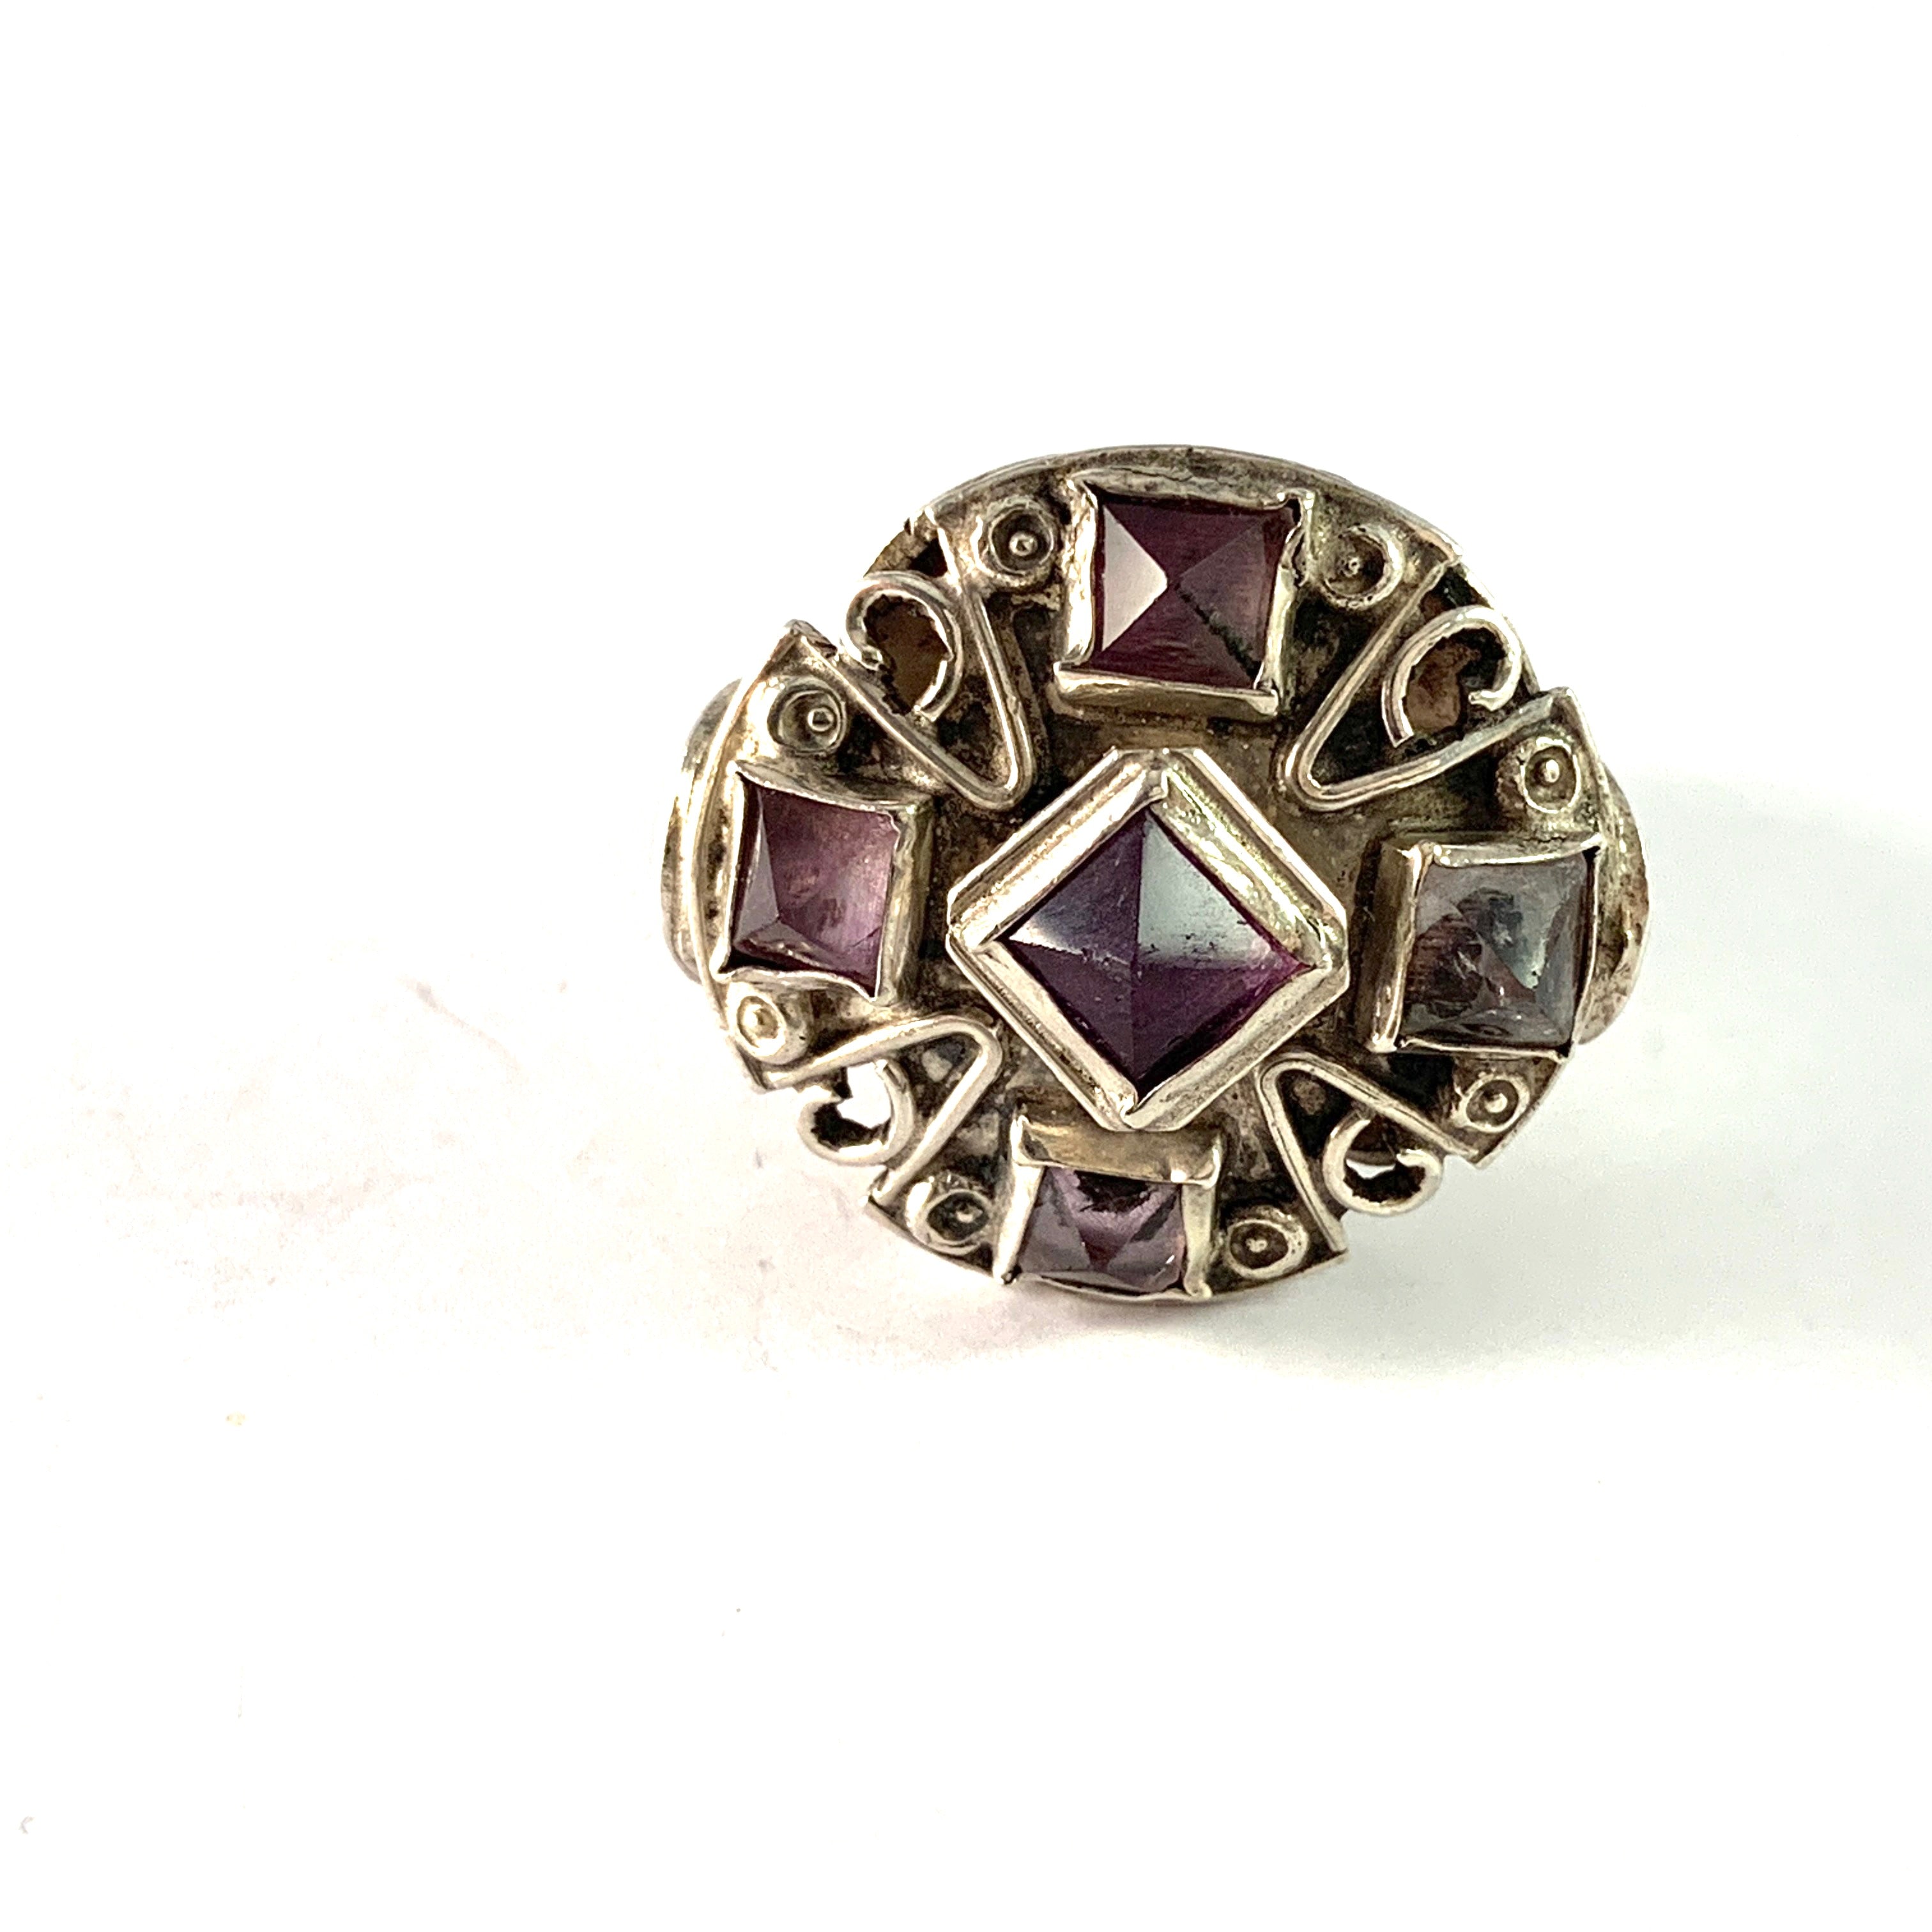 MATL Matilde Poulat, Mexico Vintage c 1950 Bold Sterling Silver Amethyst Ring